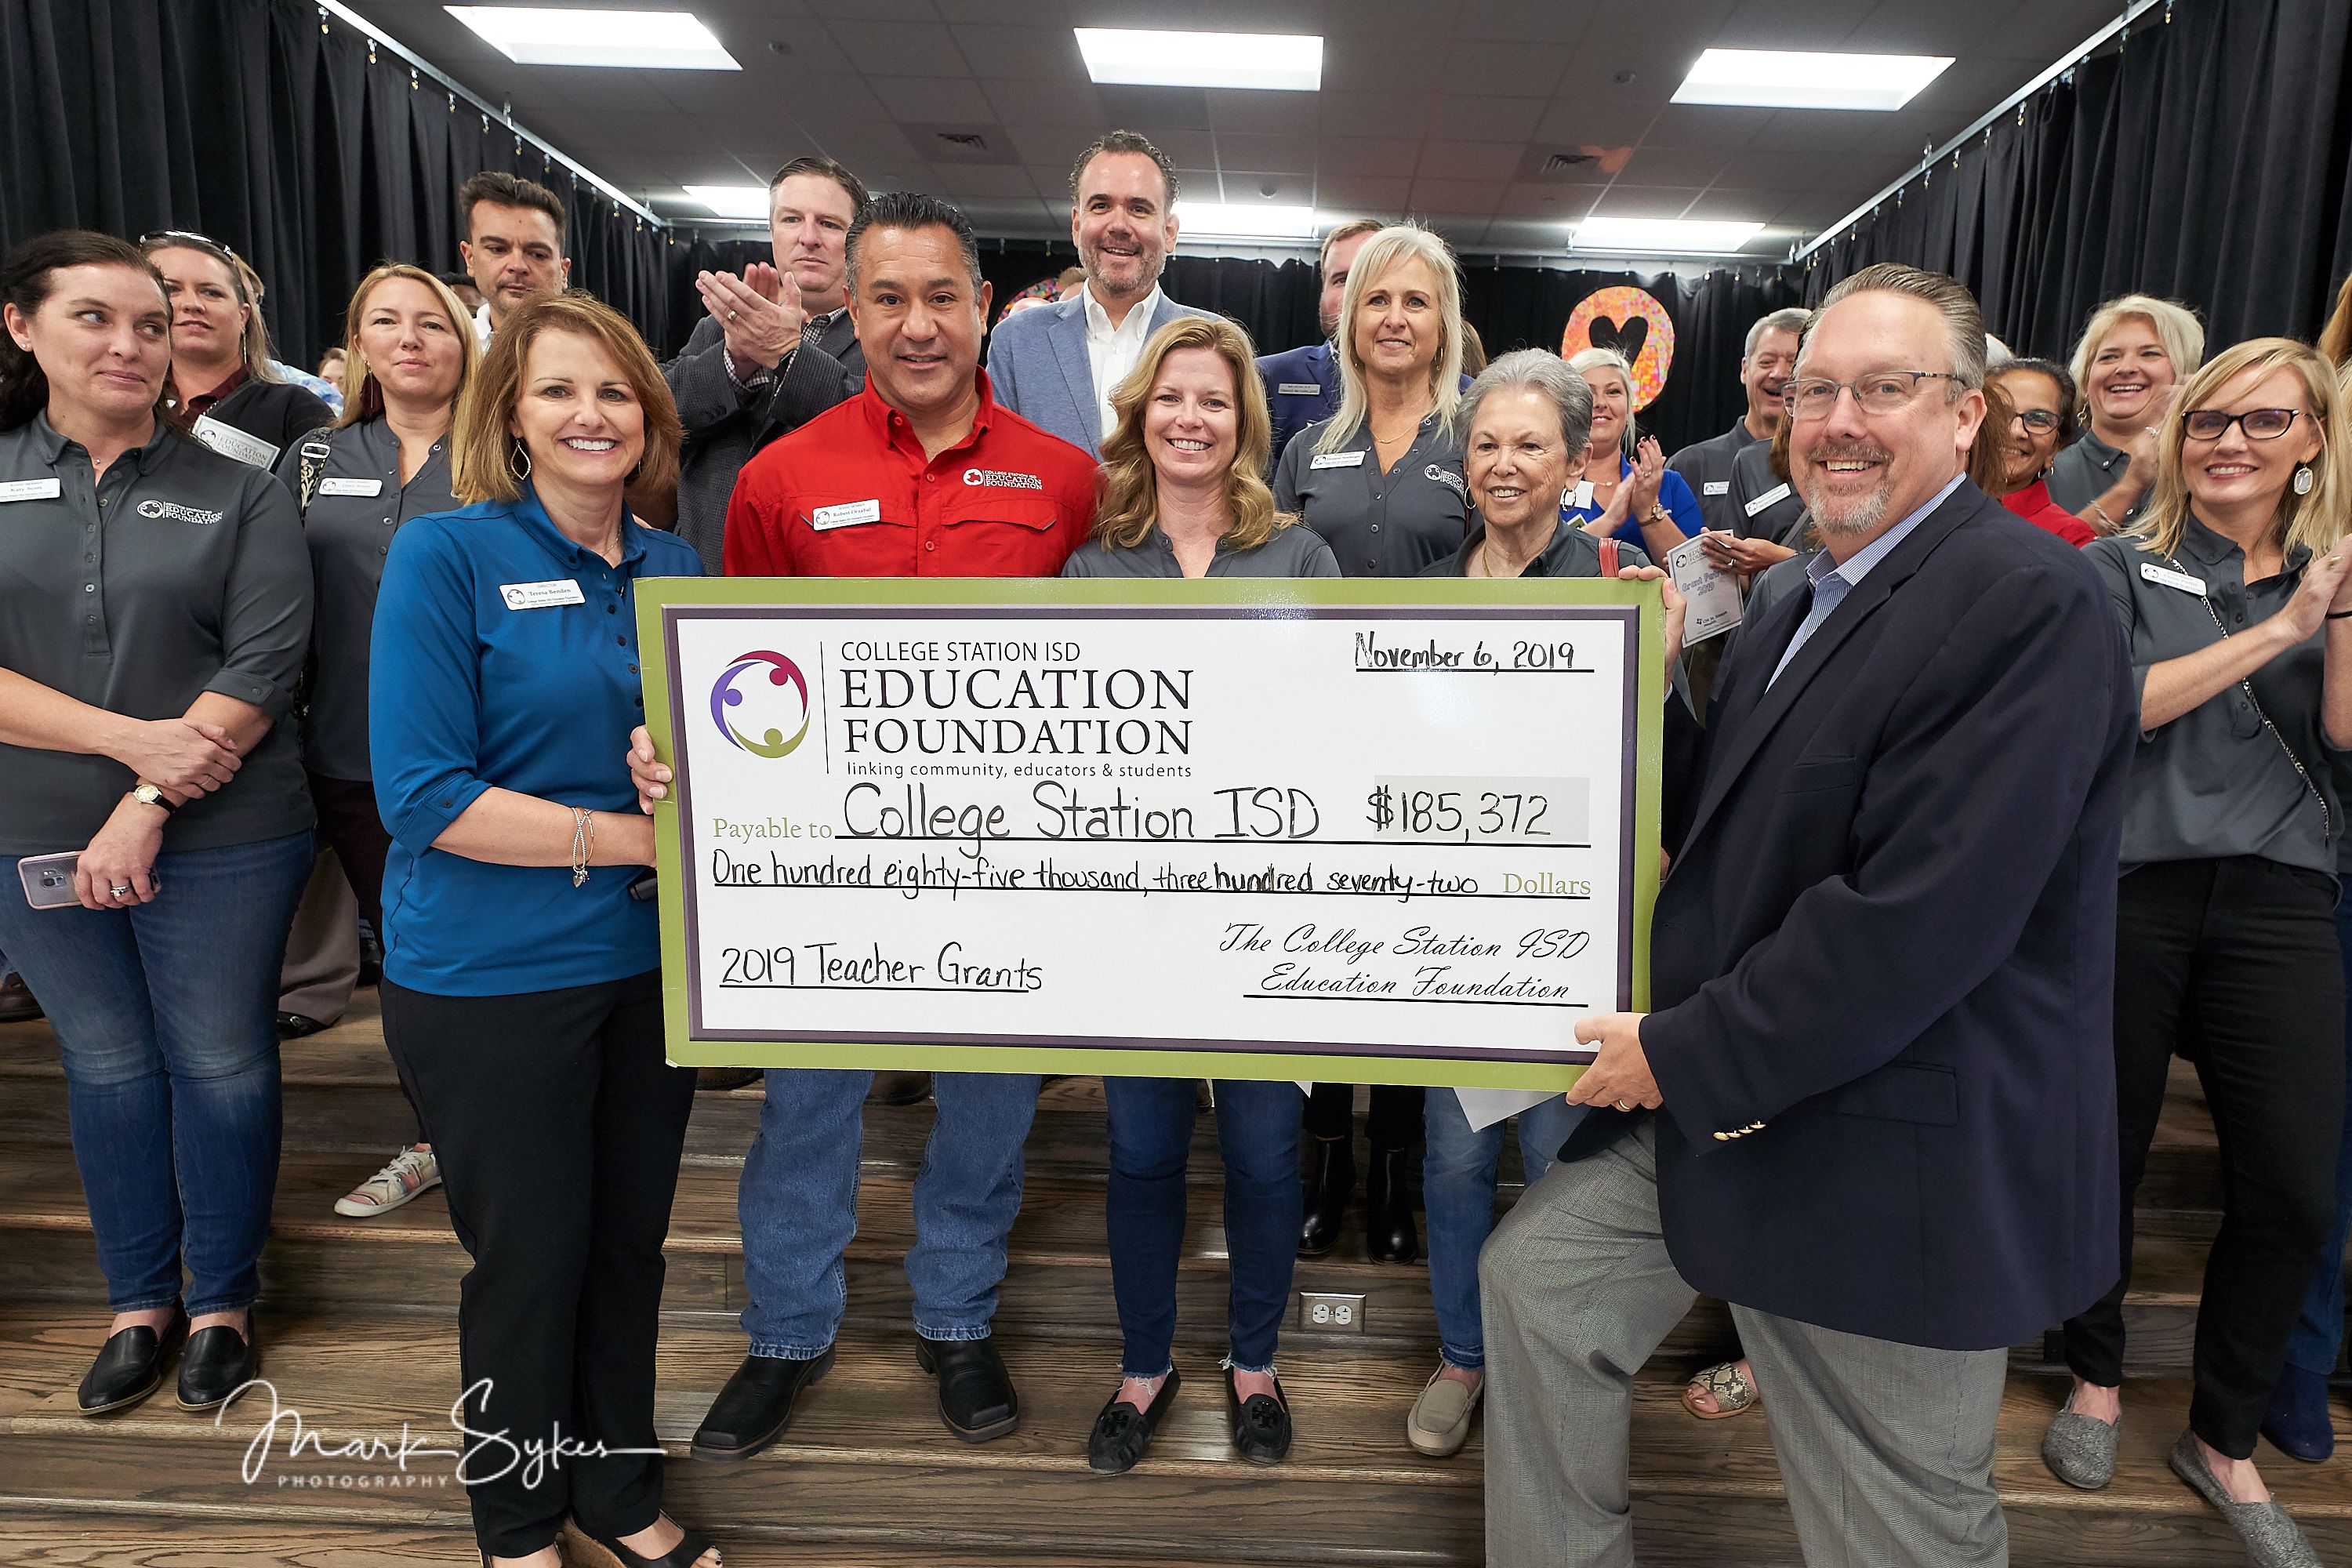 College Station Teachers Receive $185,000 in Innovative Grants from CSISD Education Foundation